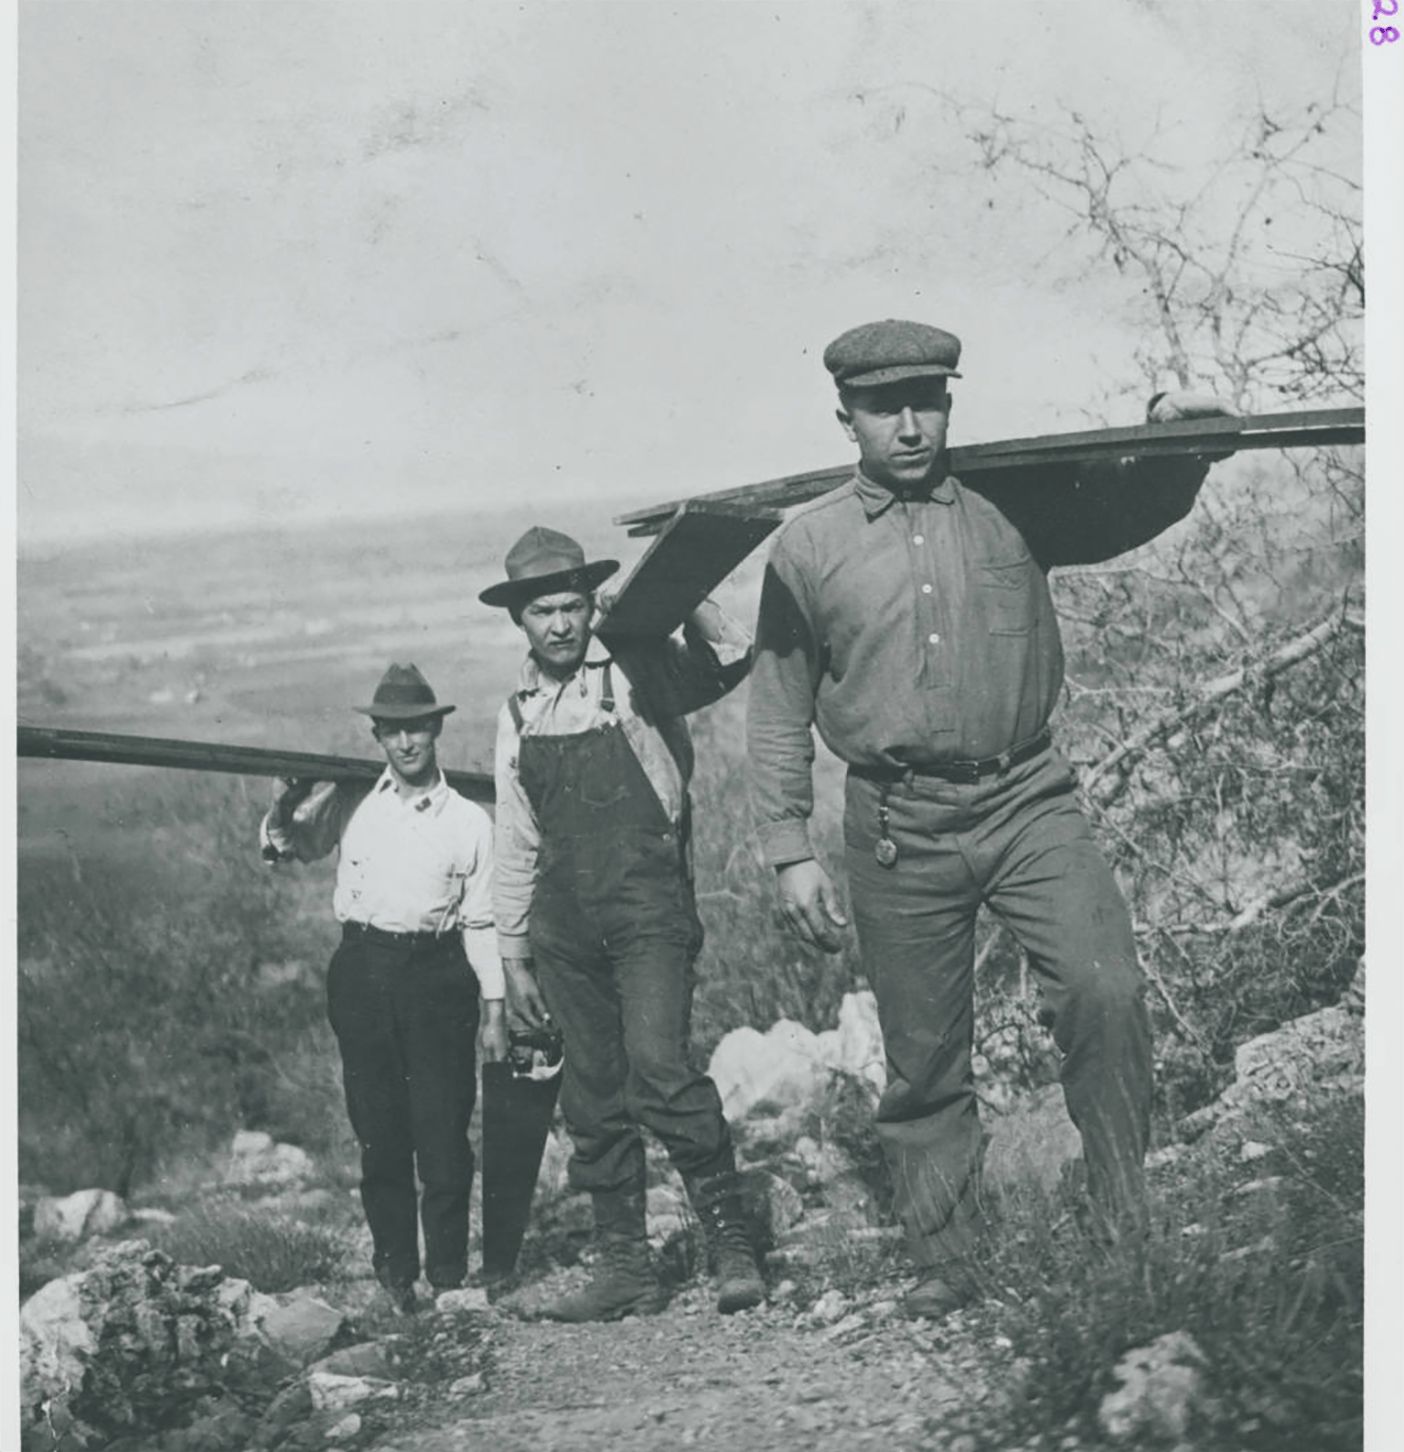 Workers carrying boards up the mountainside in 1915.